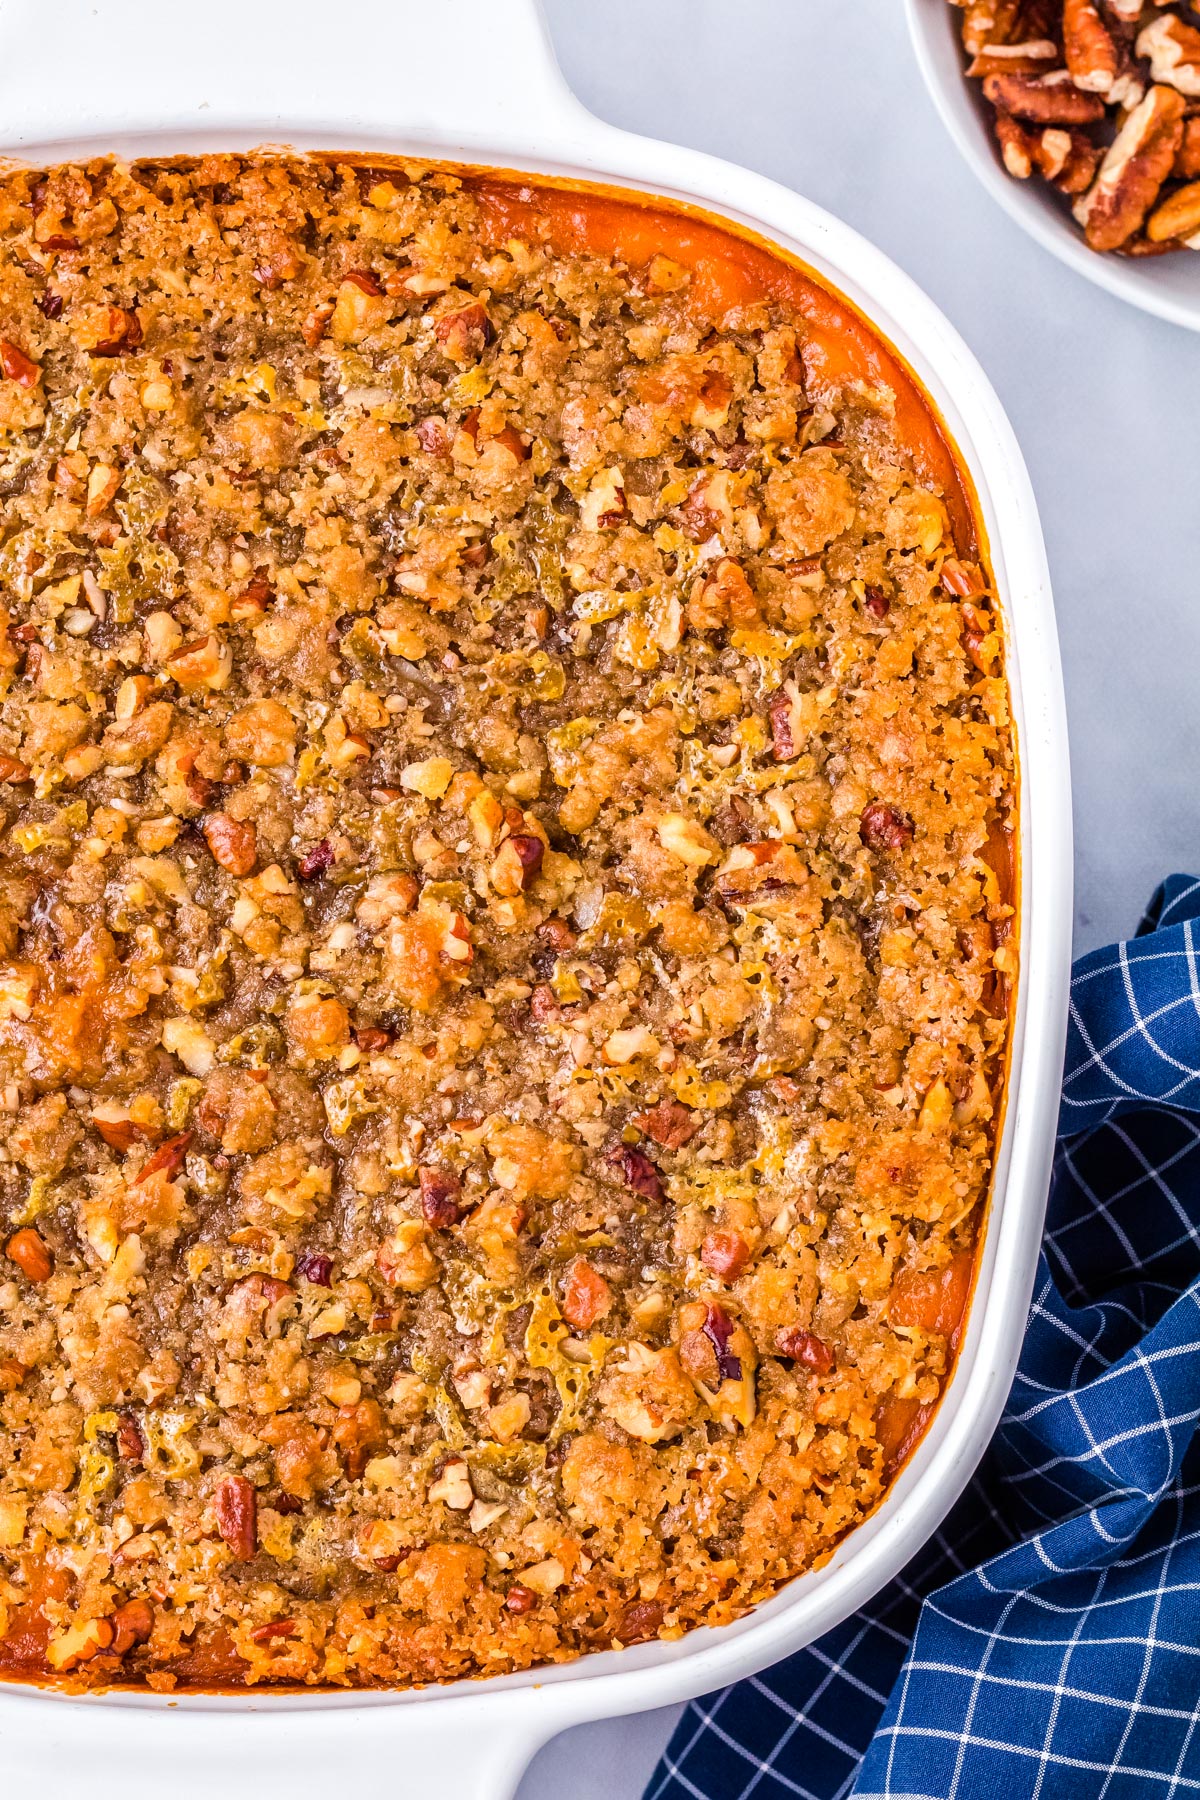 A close up picture of the Sweet Potato Soufflé so you can sew the buttery pecan topping.